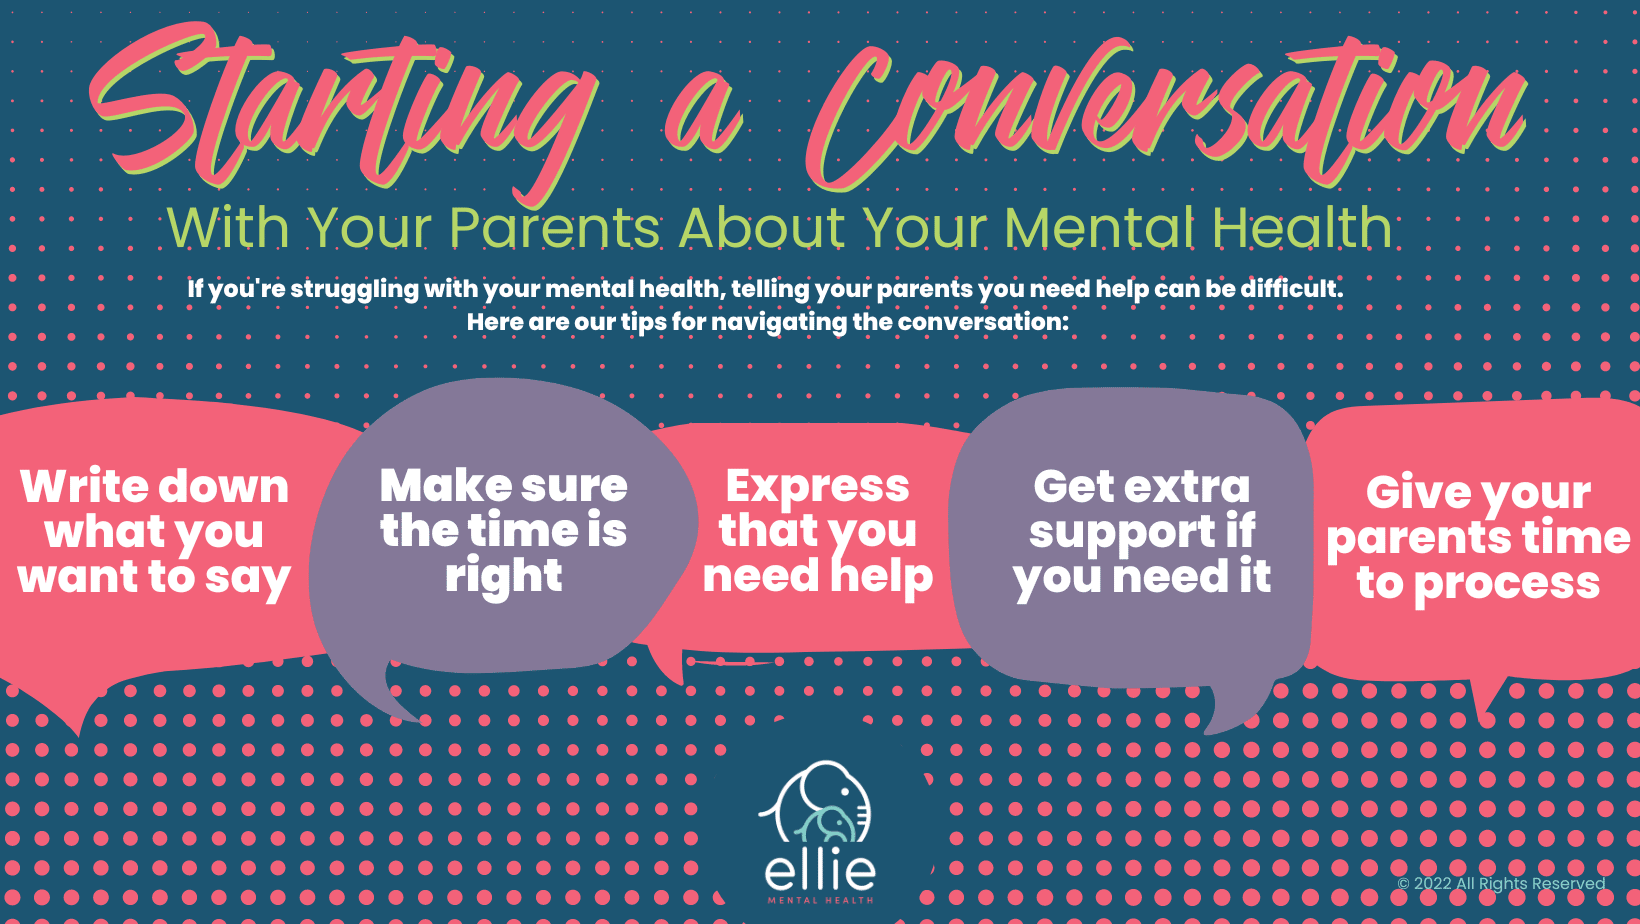 Starting a Conversation With Your Parents About Your Mental Health Infographic
